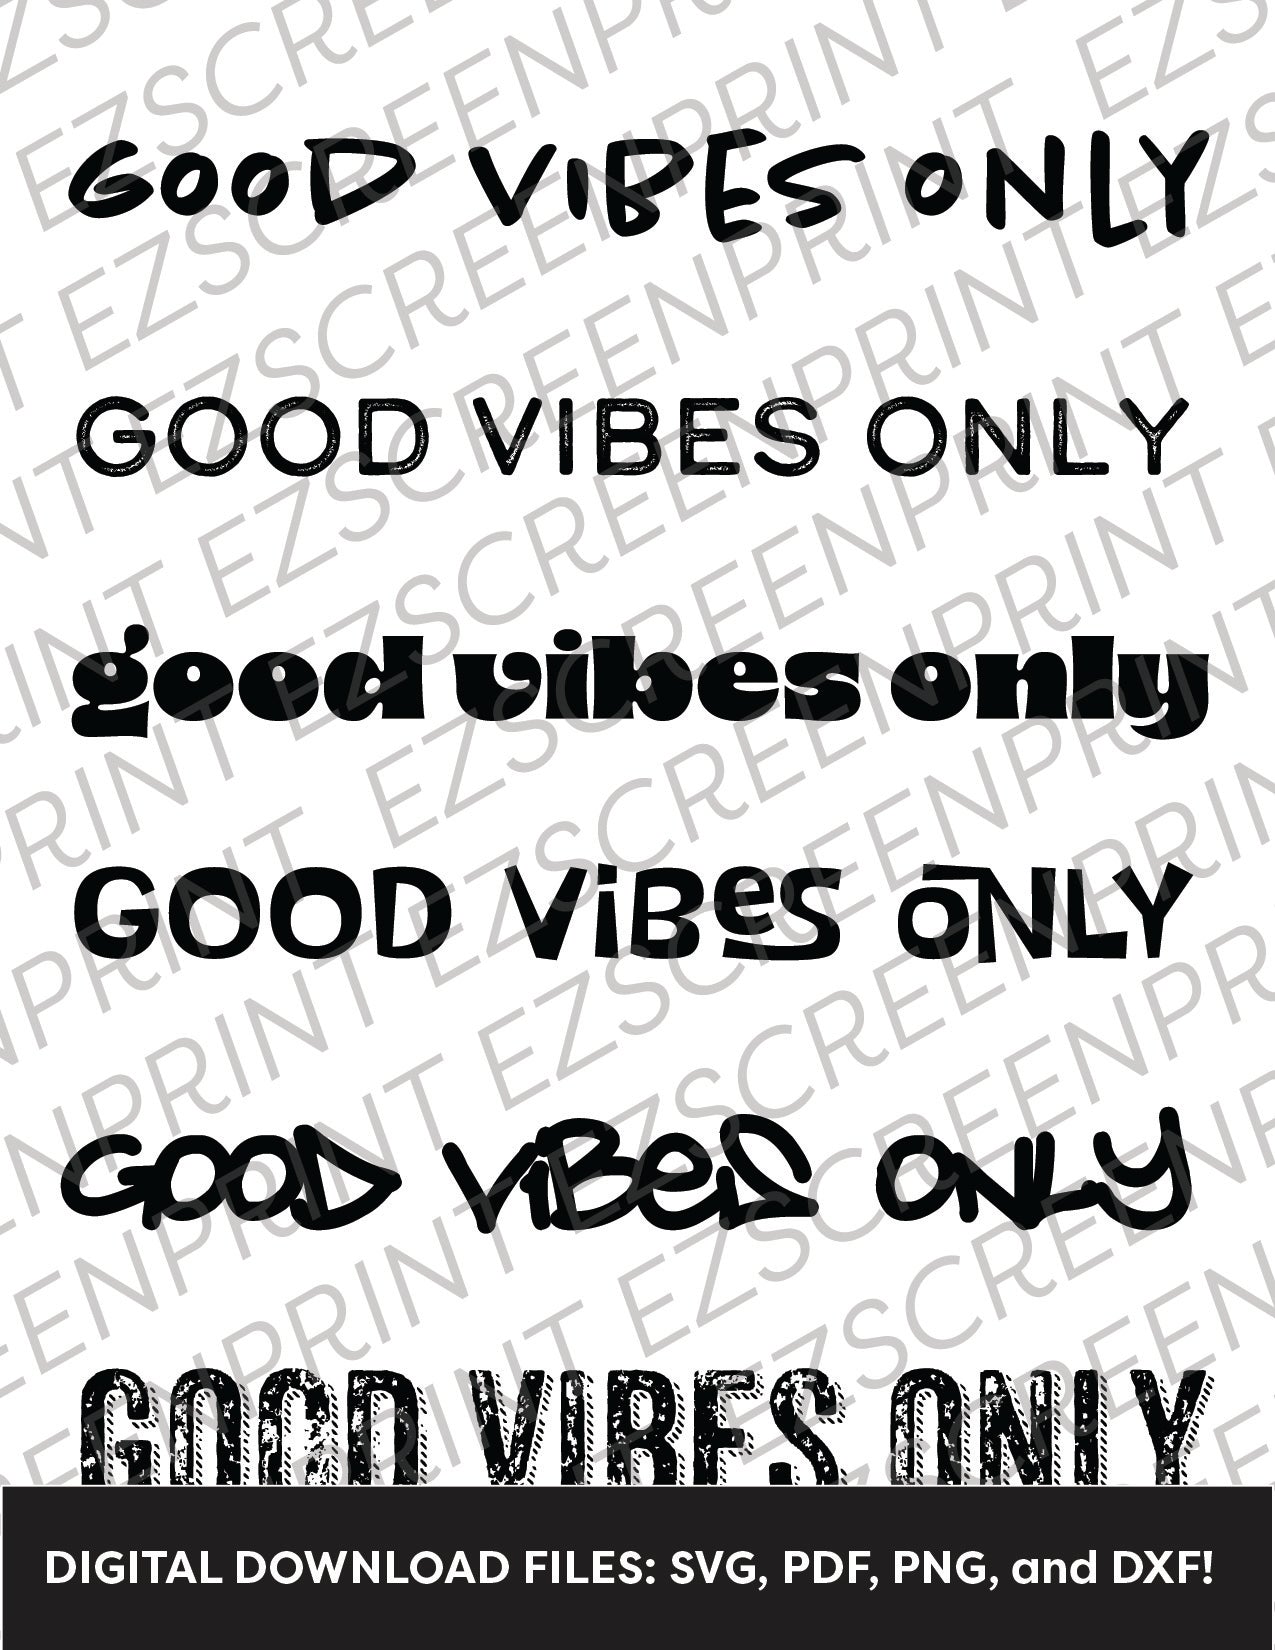 Good Vibes Only Phrase Pack, Various Sizes + Digital Download